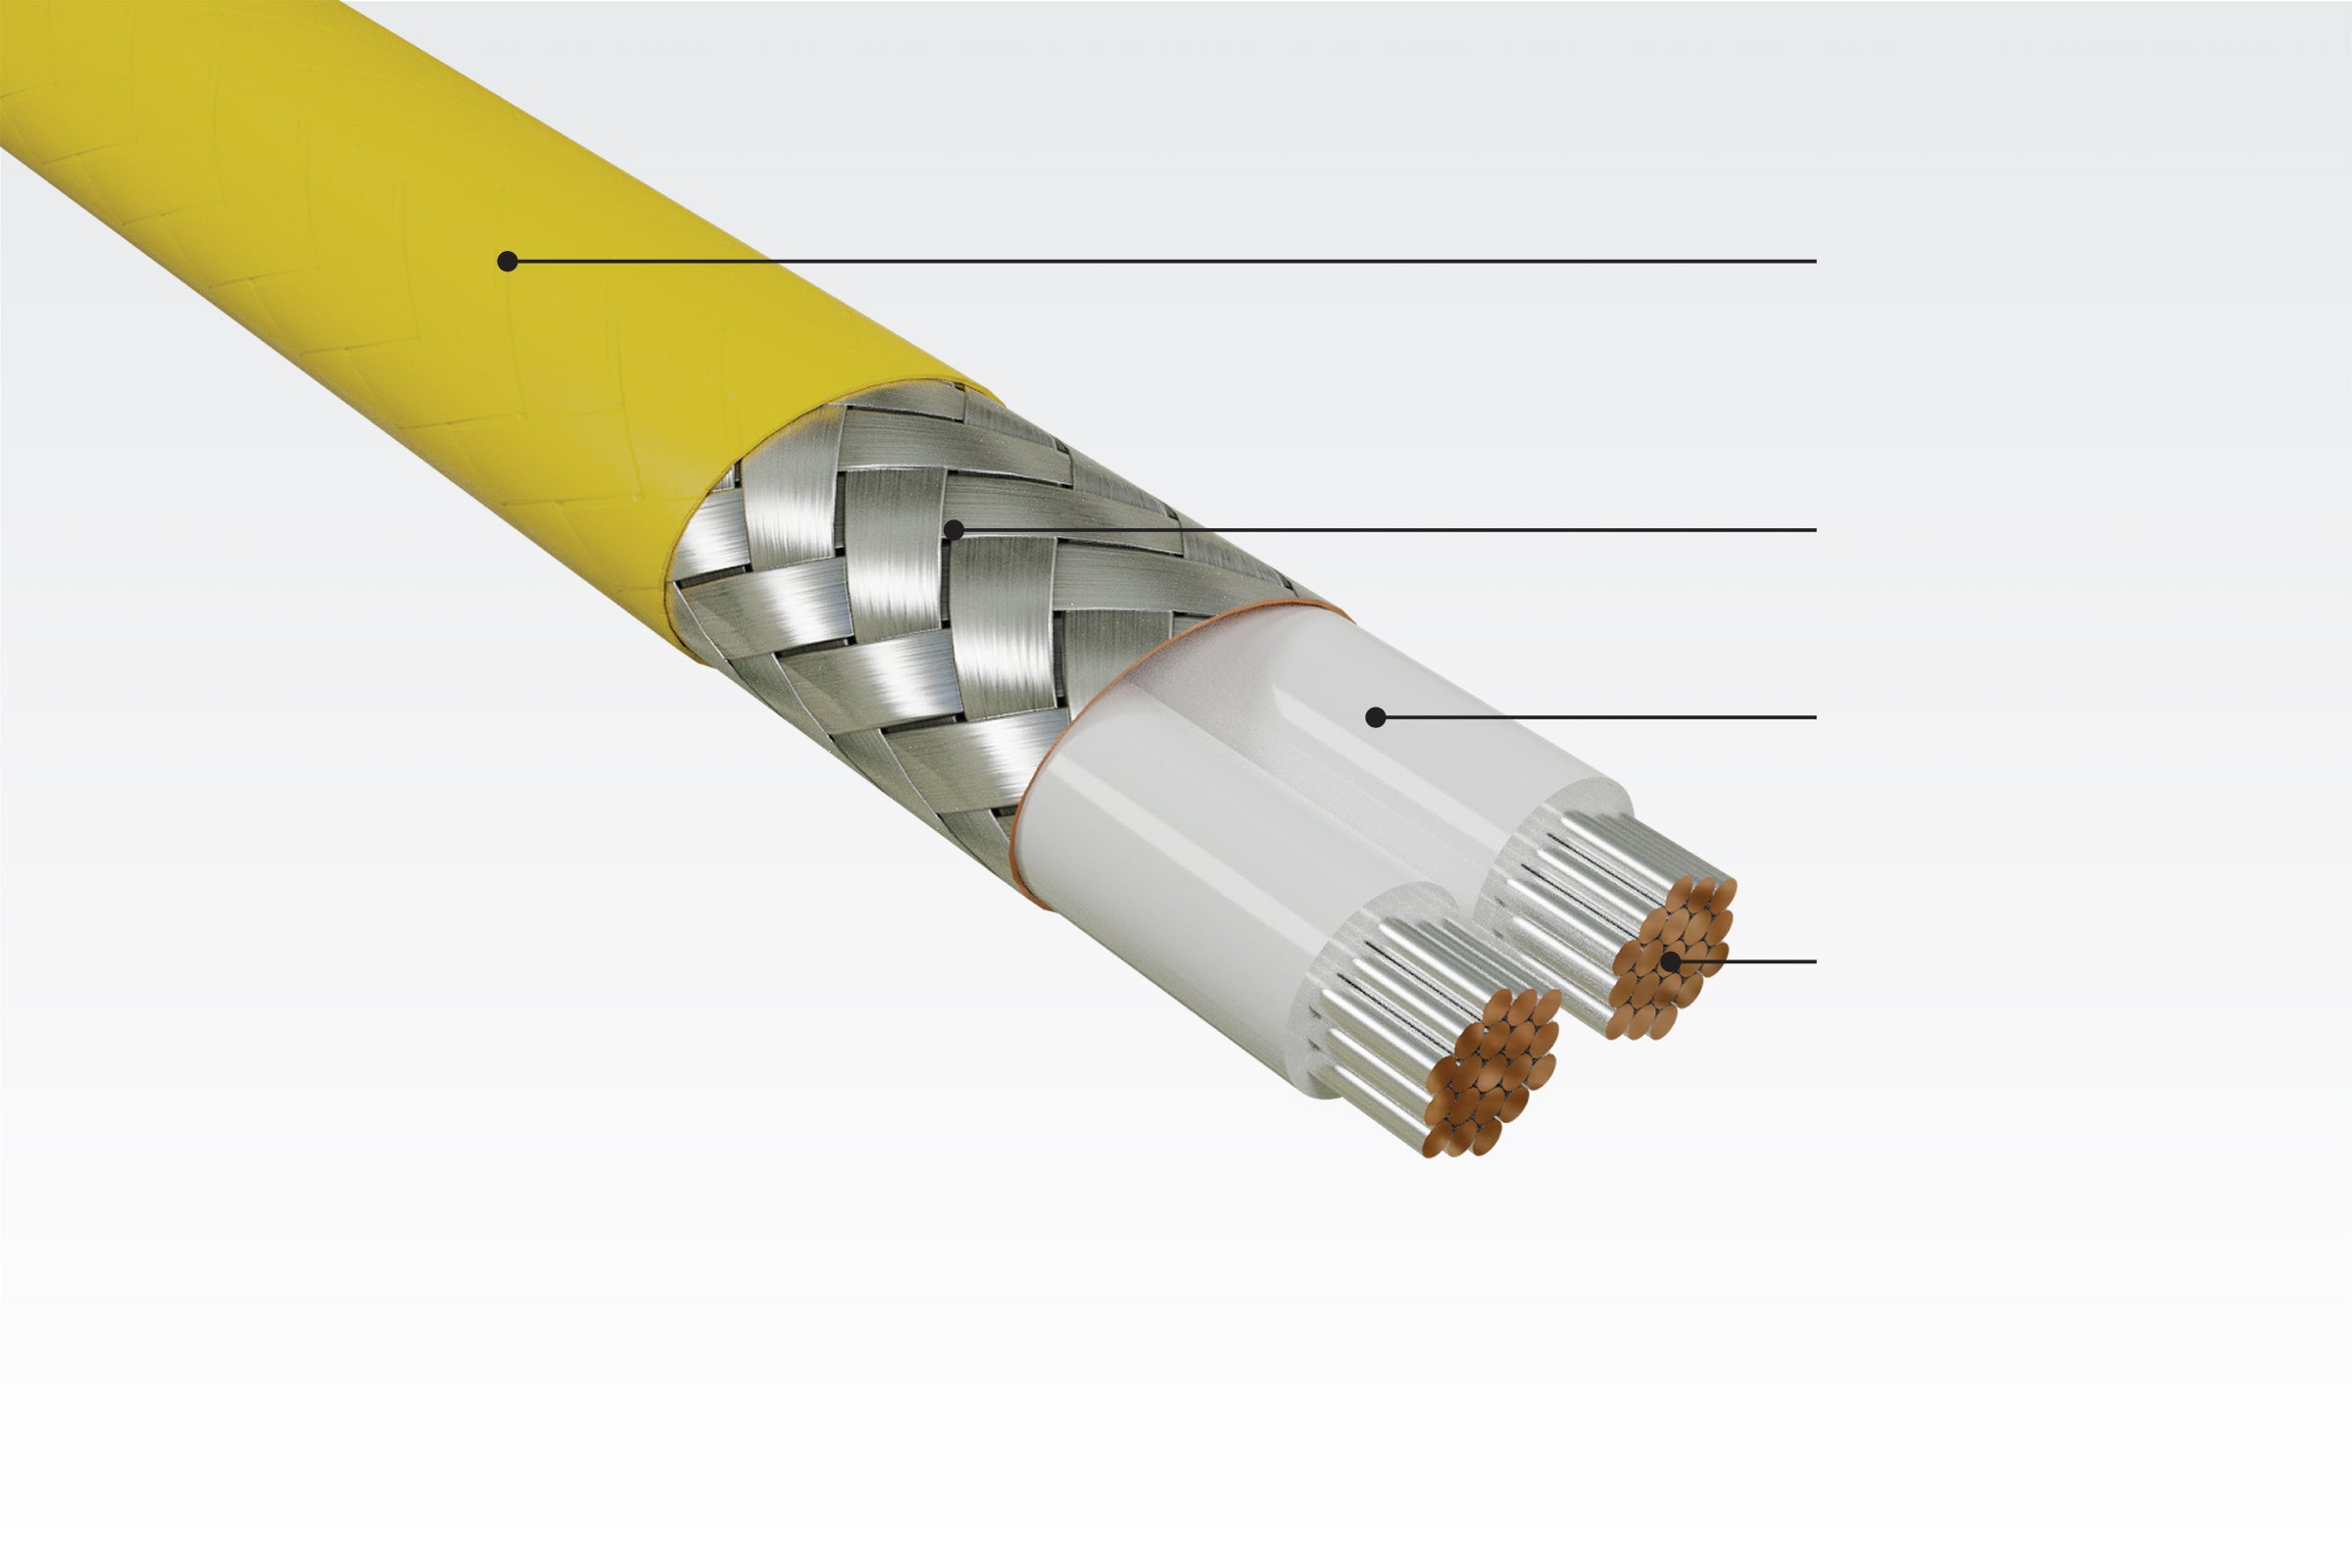 Construction of Gore’s durable, low-profile shielded twisted pair cables